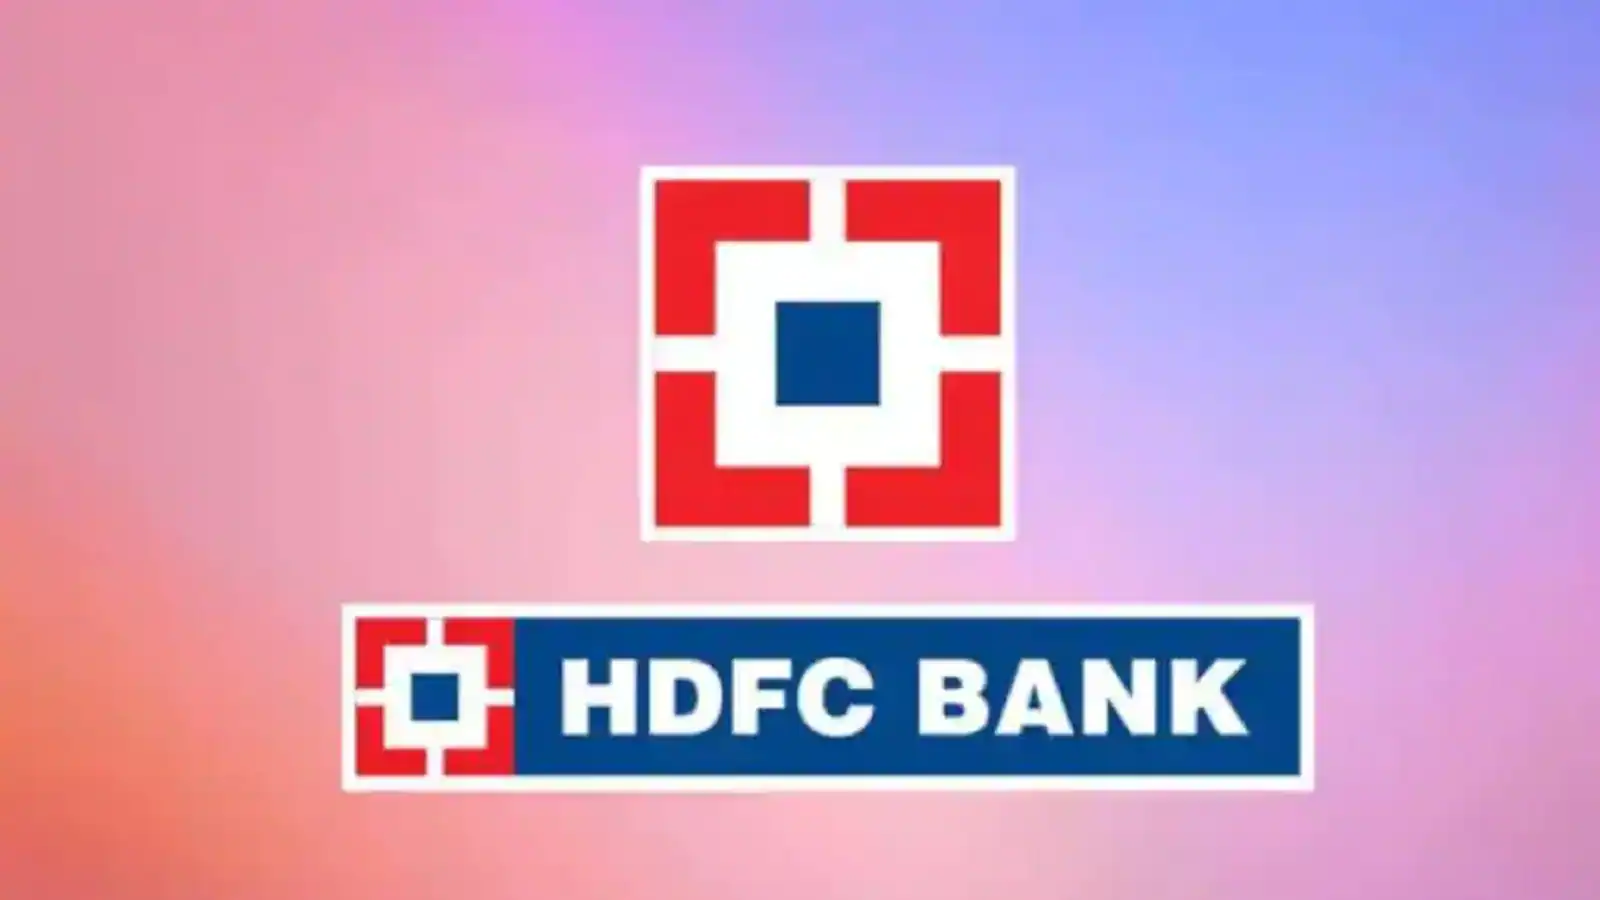 Hdfc Bank Reports Growth In Q4 Earnings 2991